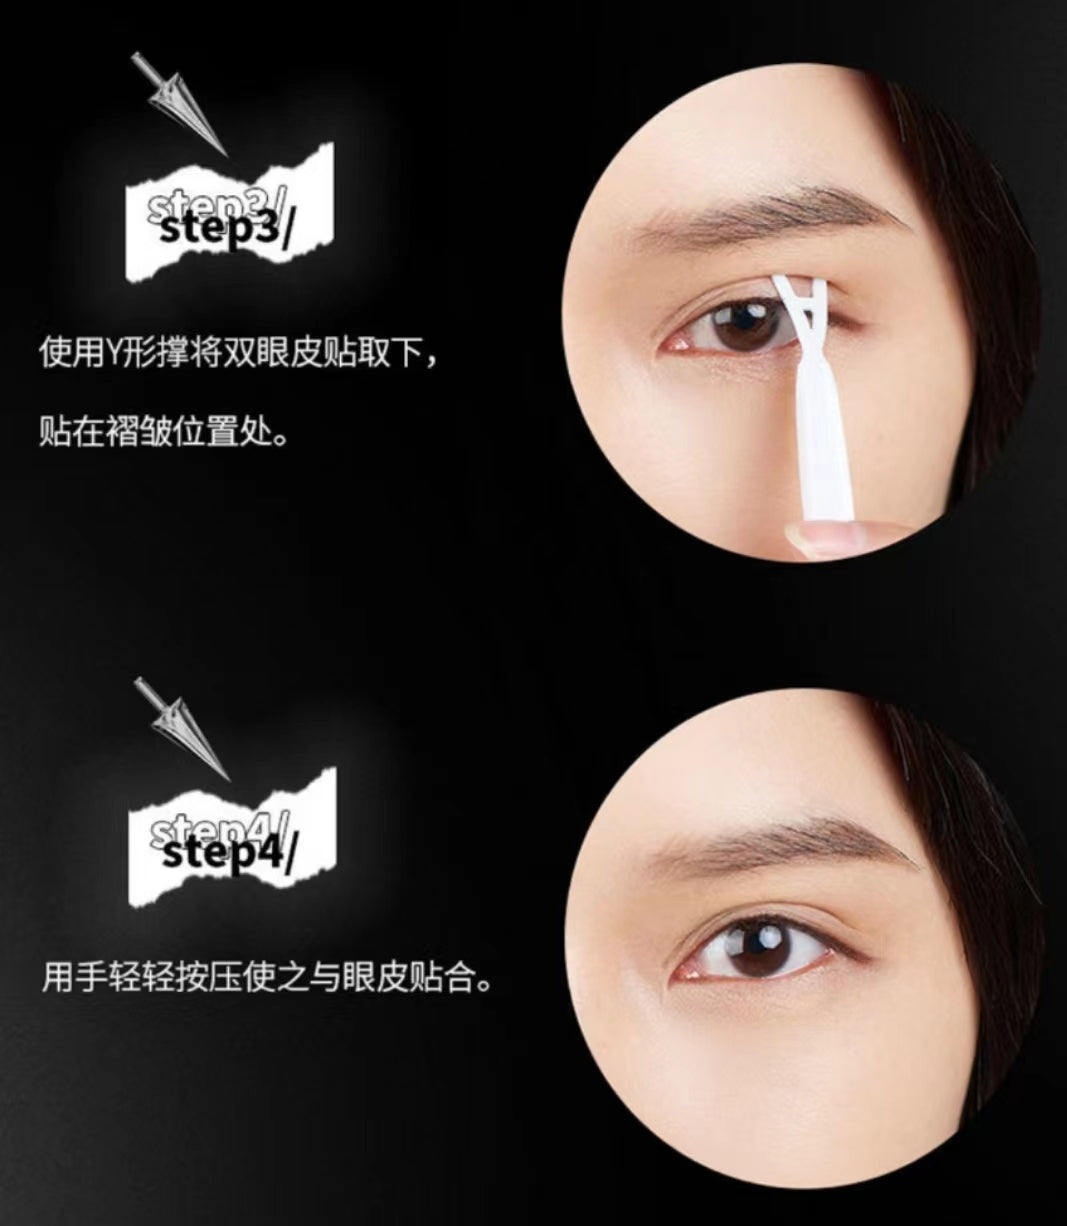 Piara Seamless Lace Natural Makeup Setting Mono-sided Double Eyelid Tape Specifically Designed for Puffy Eyes 100pcs 佩冉无痕蕾丝自然持妆定型肿眼泡专用单面双眼皮贴